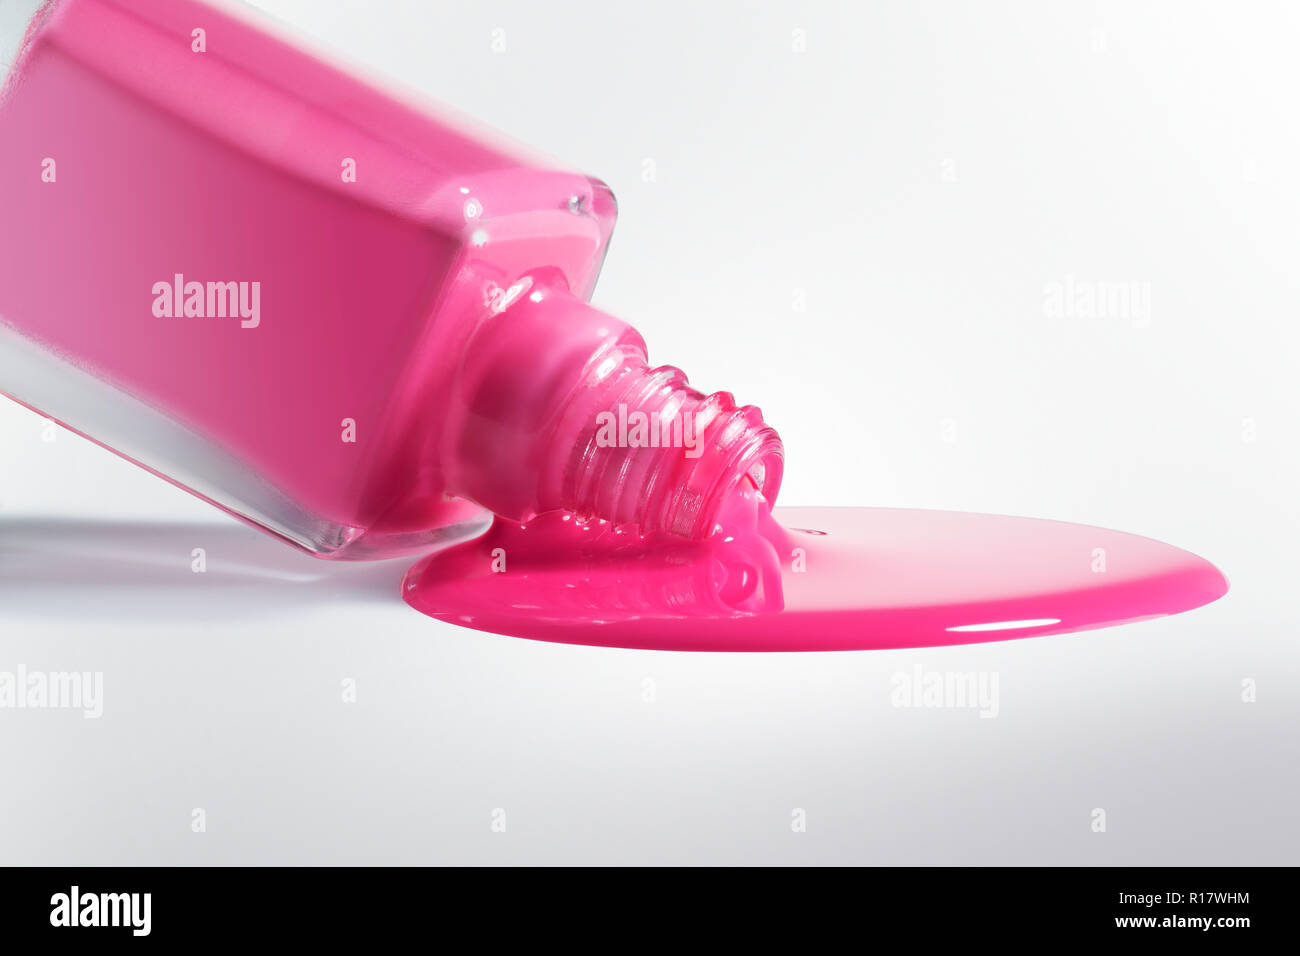 Pink nail polish forming puddle on white background, close up Stock Photo